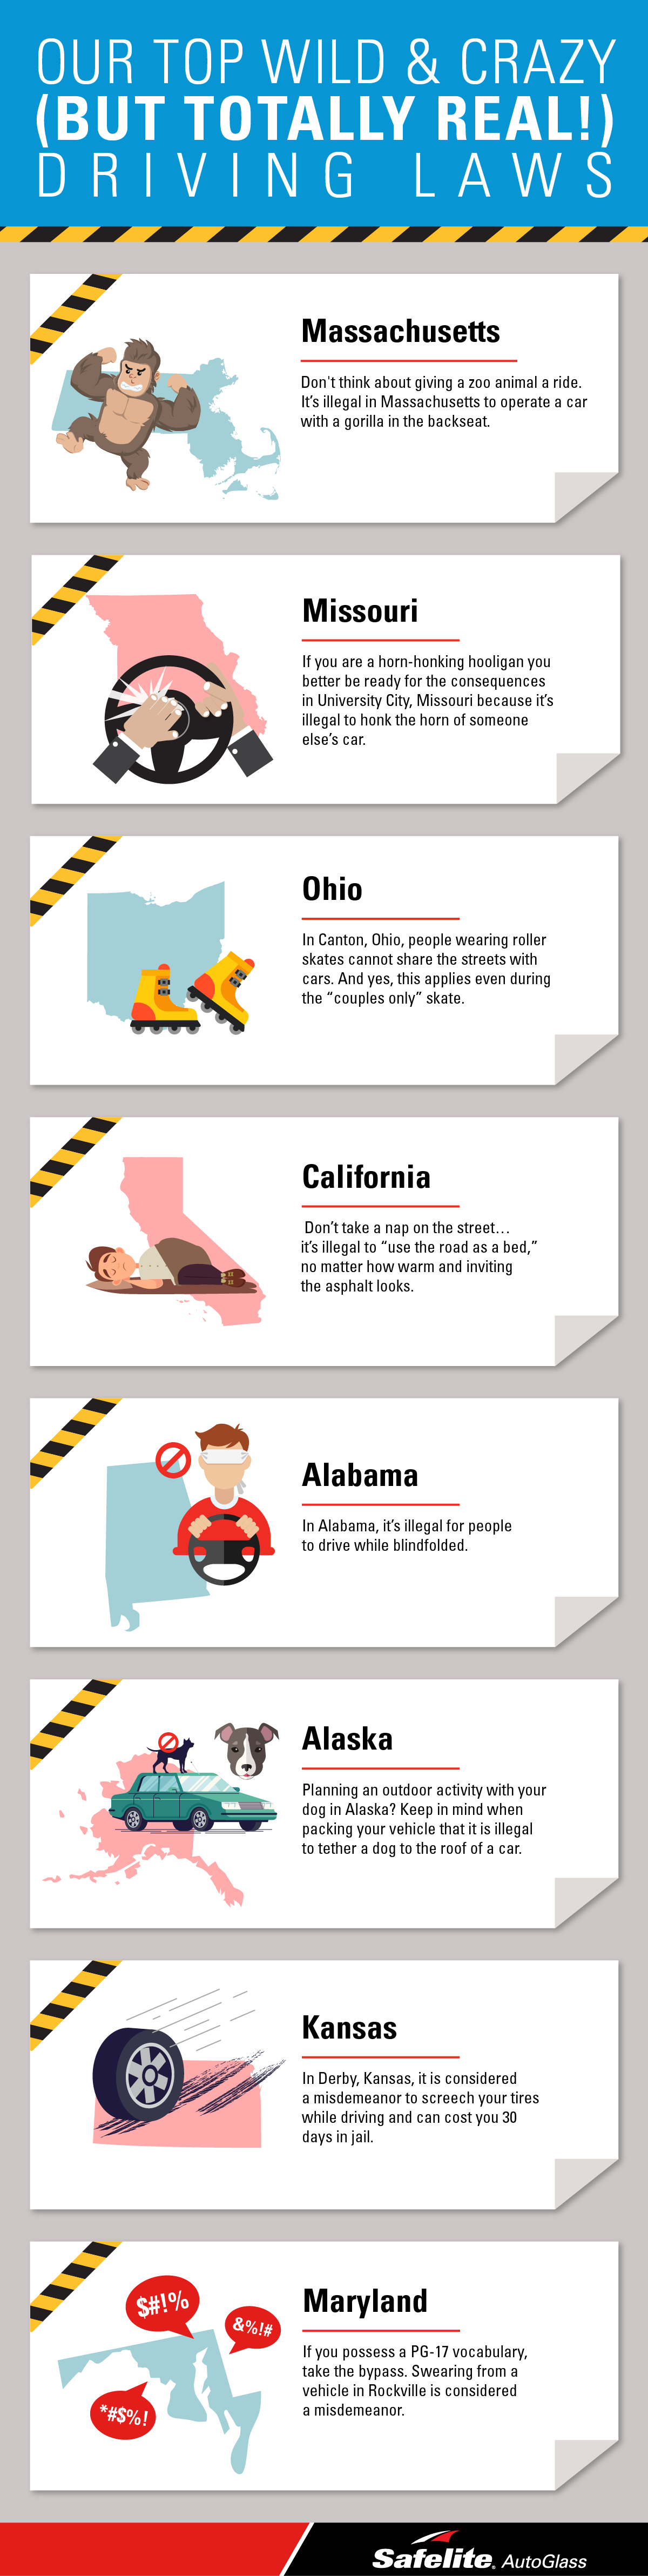 Though April Fool's Day did just pass, we're not joking around! These are some of the most interesting driving laws.